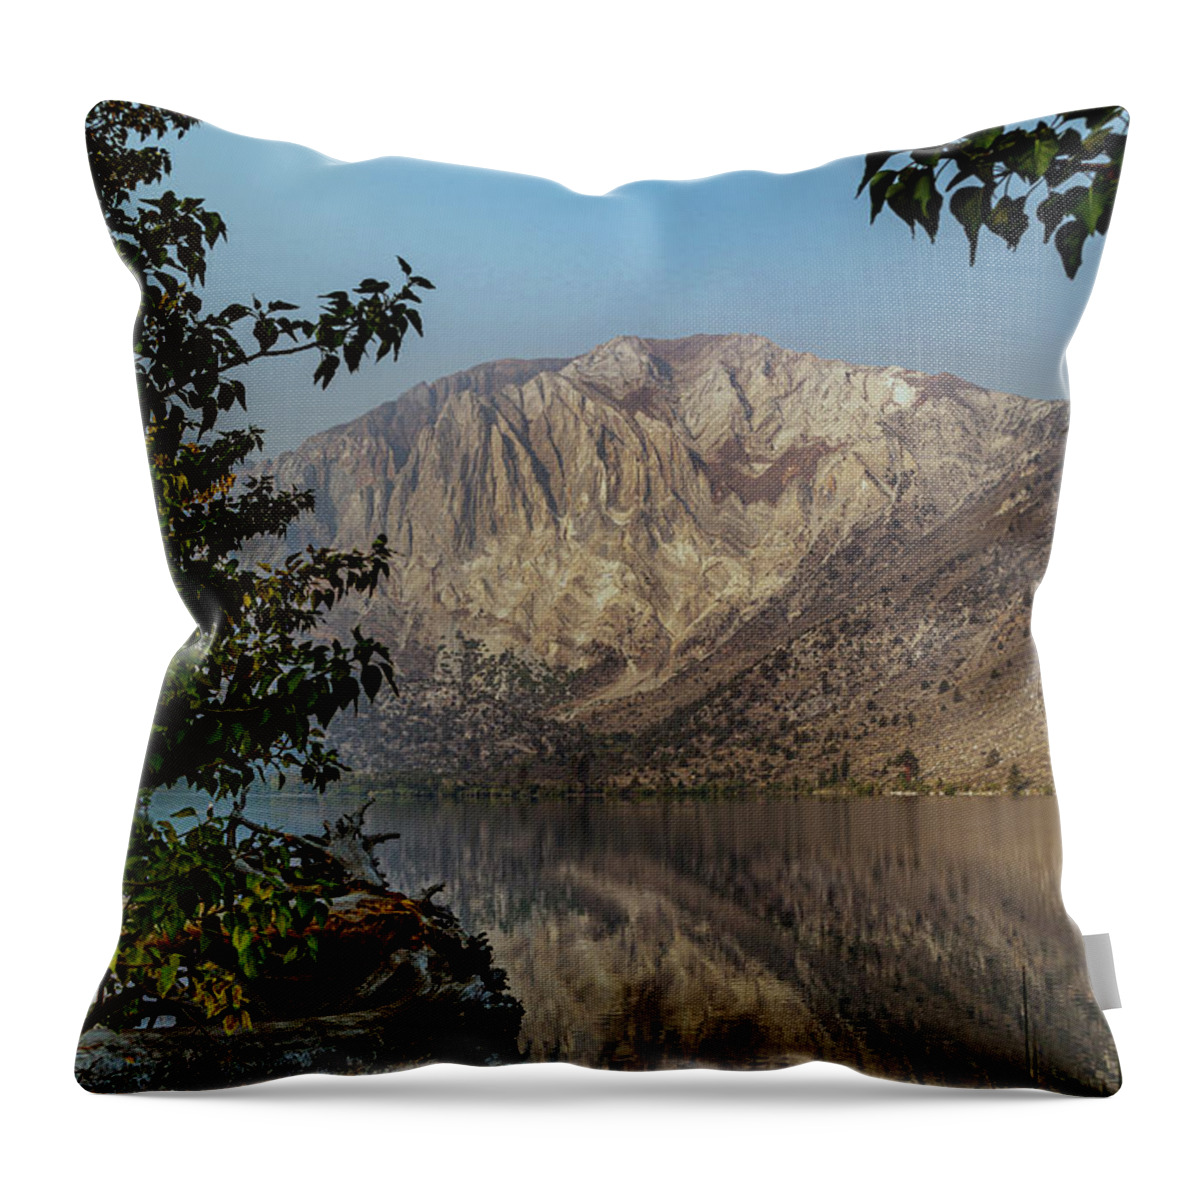 Convict Lake Throw Pillow featuring the photograph Convict Lake 3 by Cindy Robinson